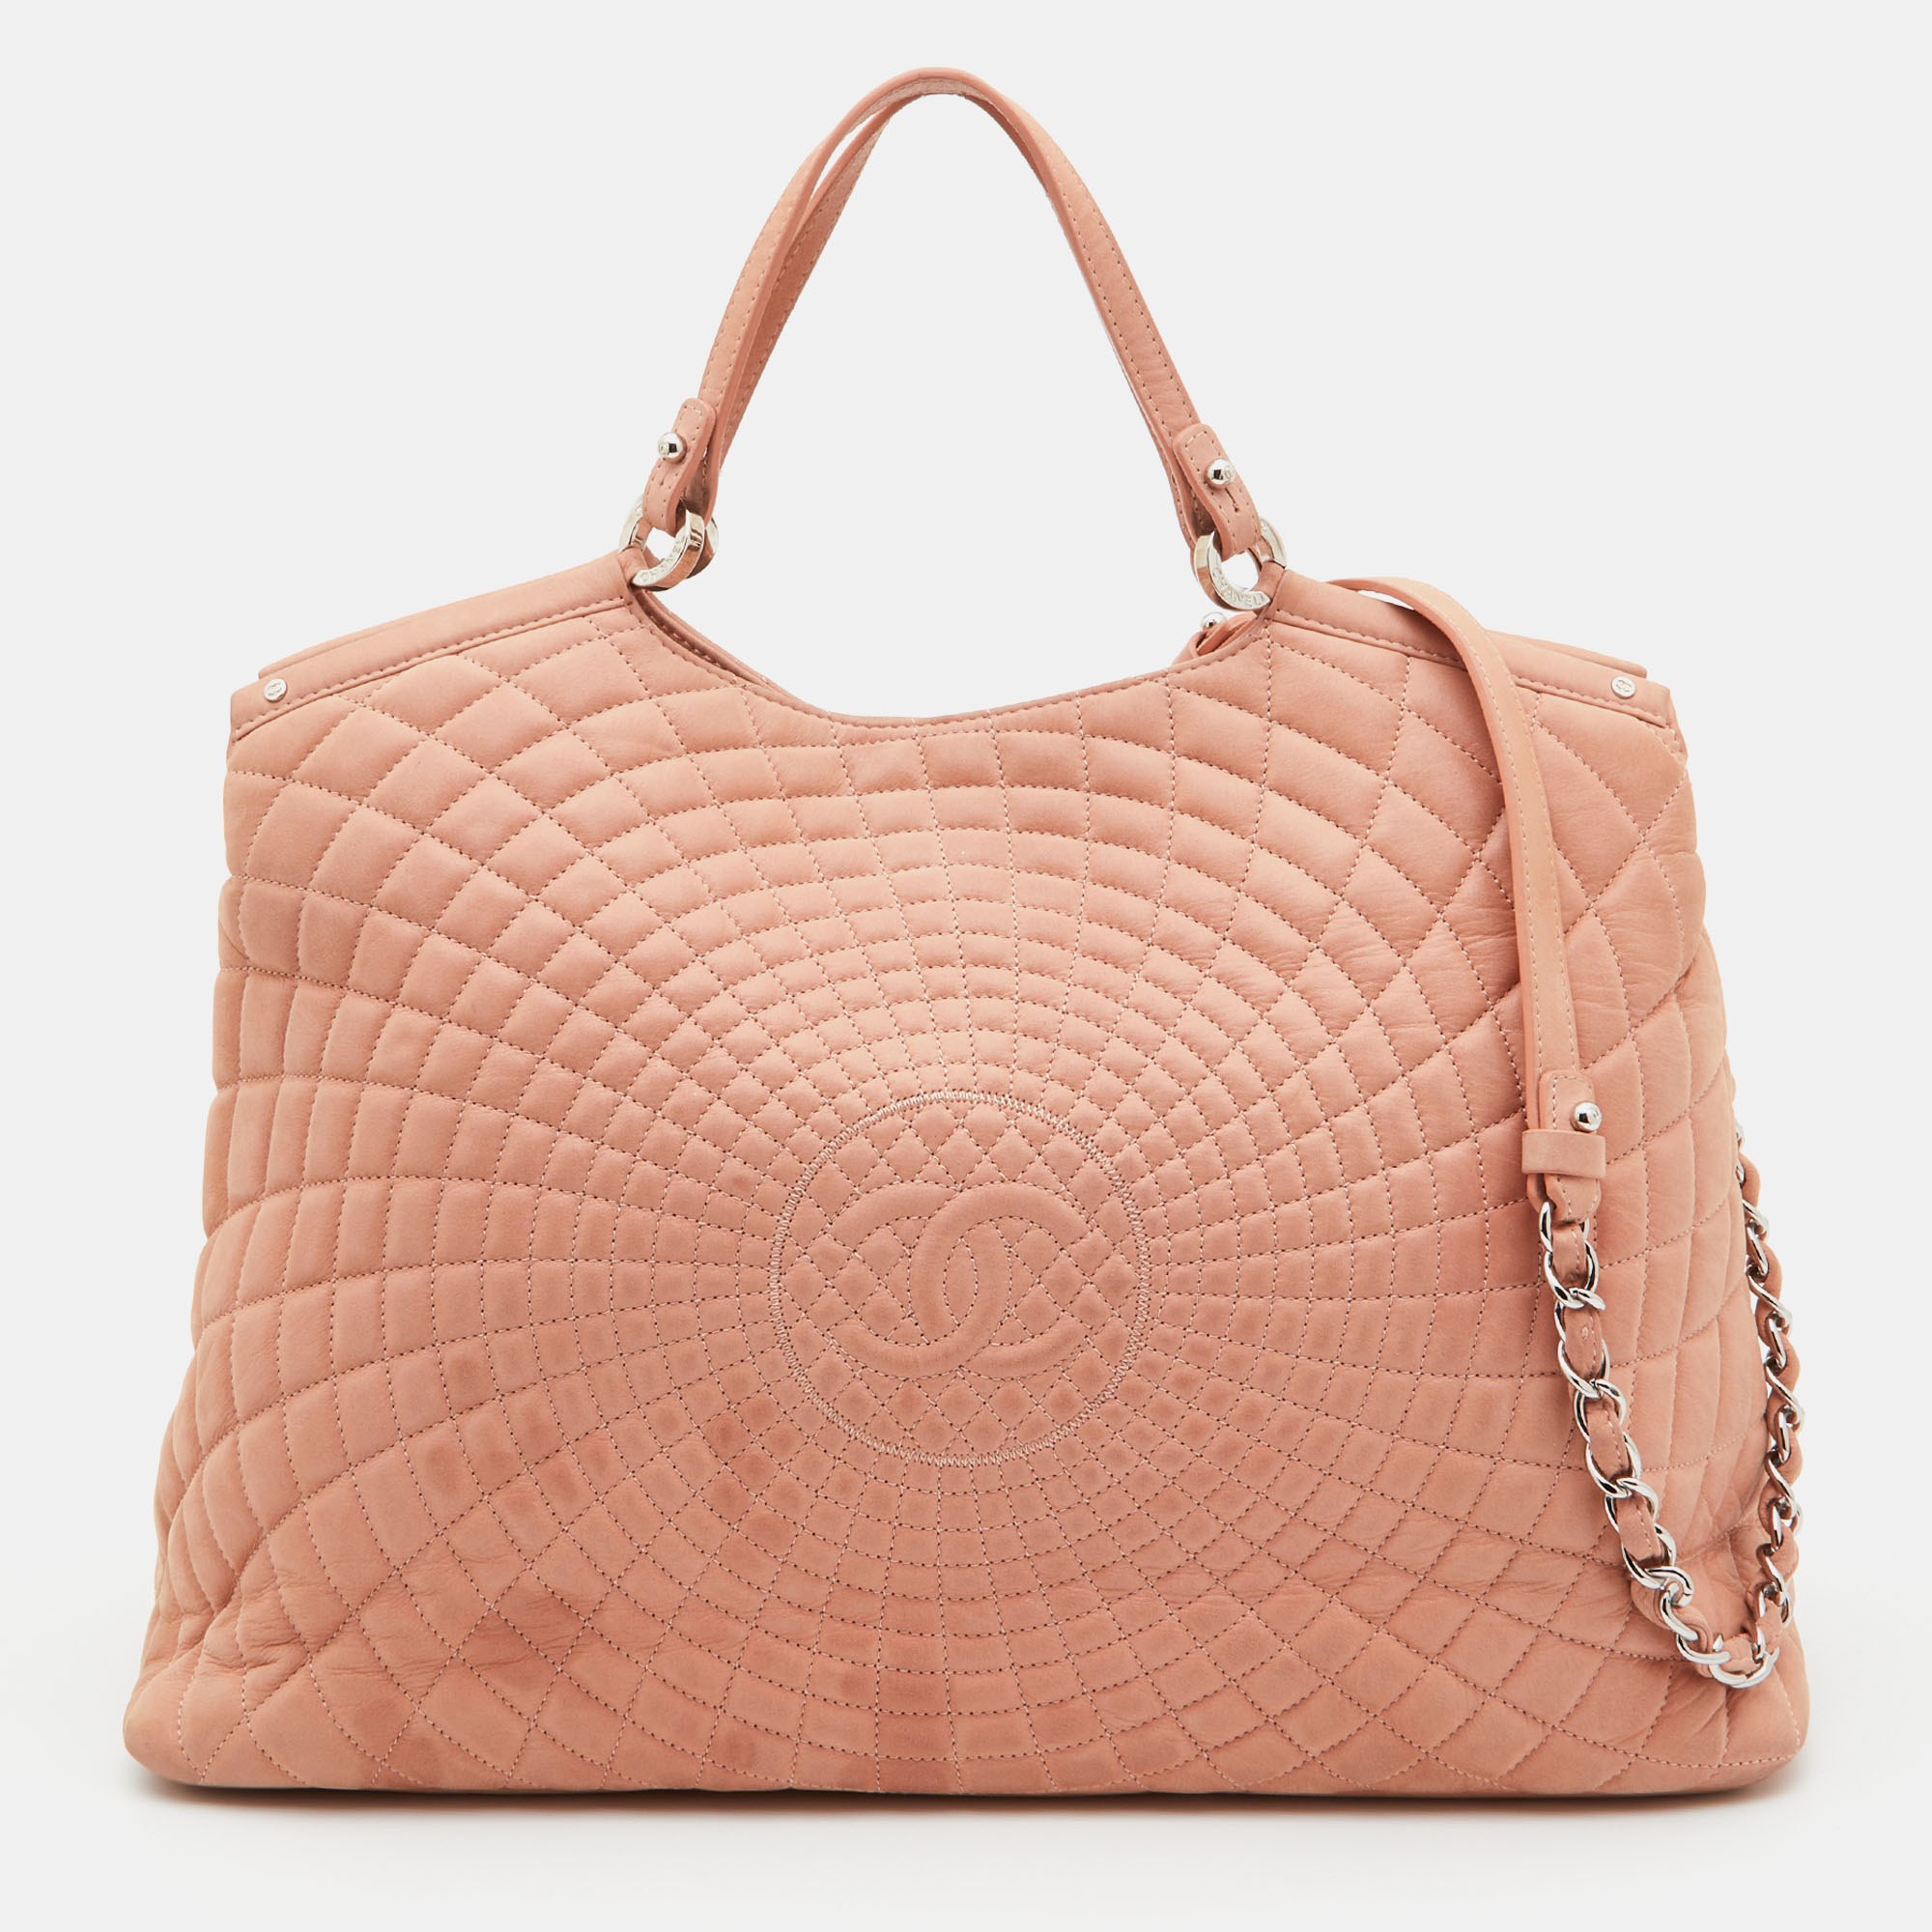 Pre-owned Chanel Light Pink Quilted Iridescent Leather Large Sea Hit Tote